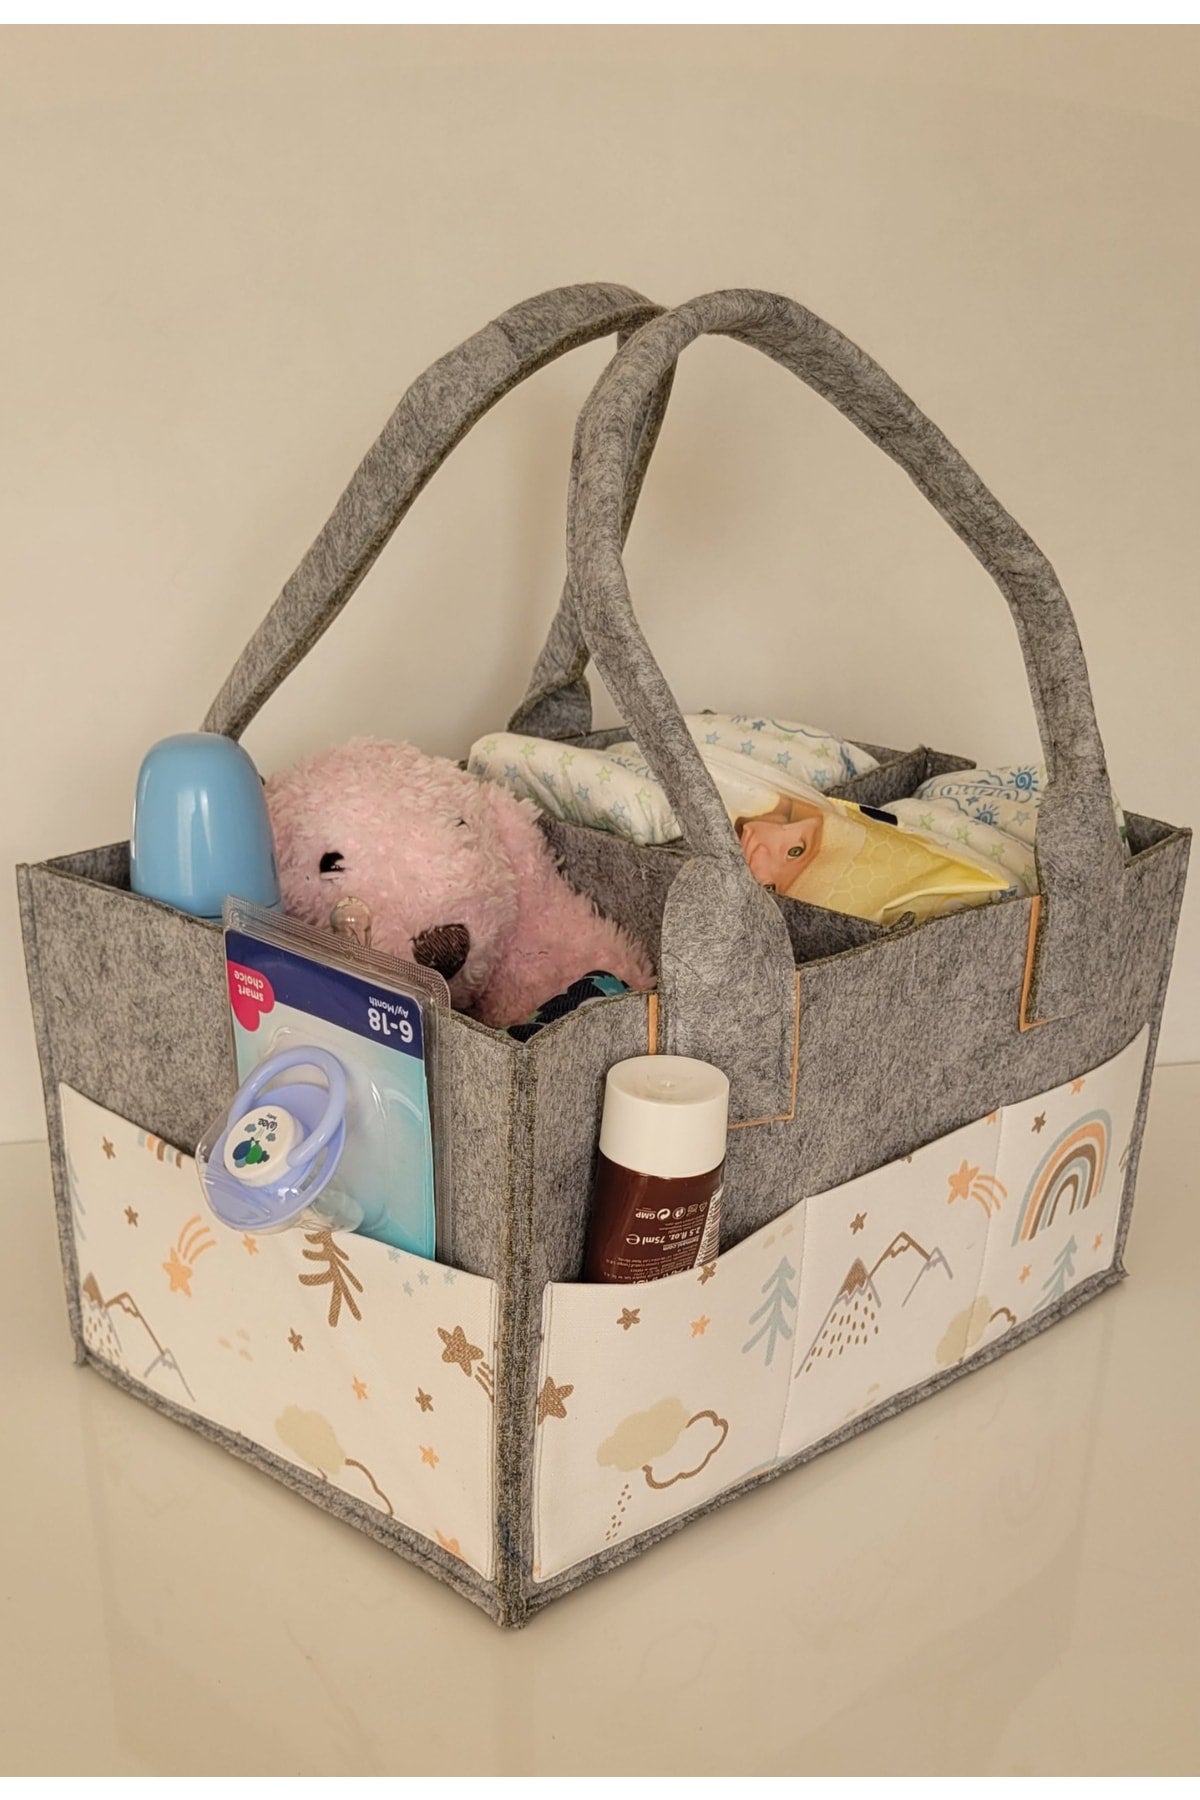 Handmade Multi-Purpose Felt Mother Baby Care And Organizer Bag Functional Organizer With Lid